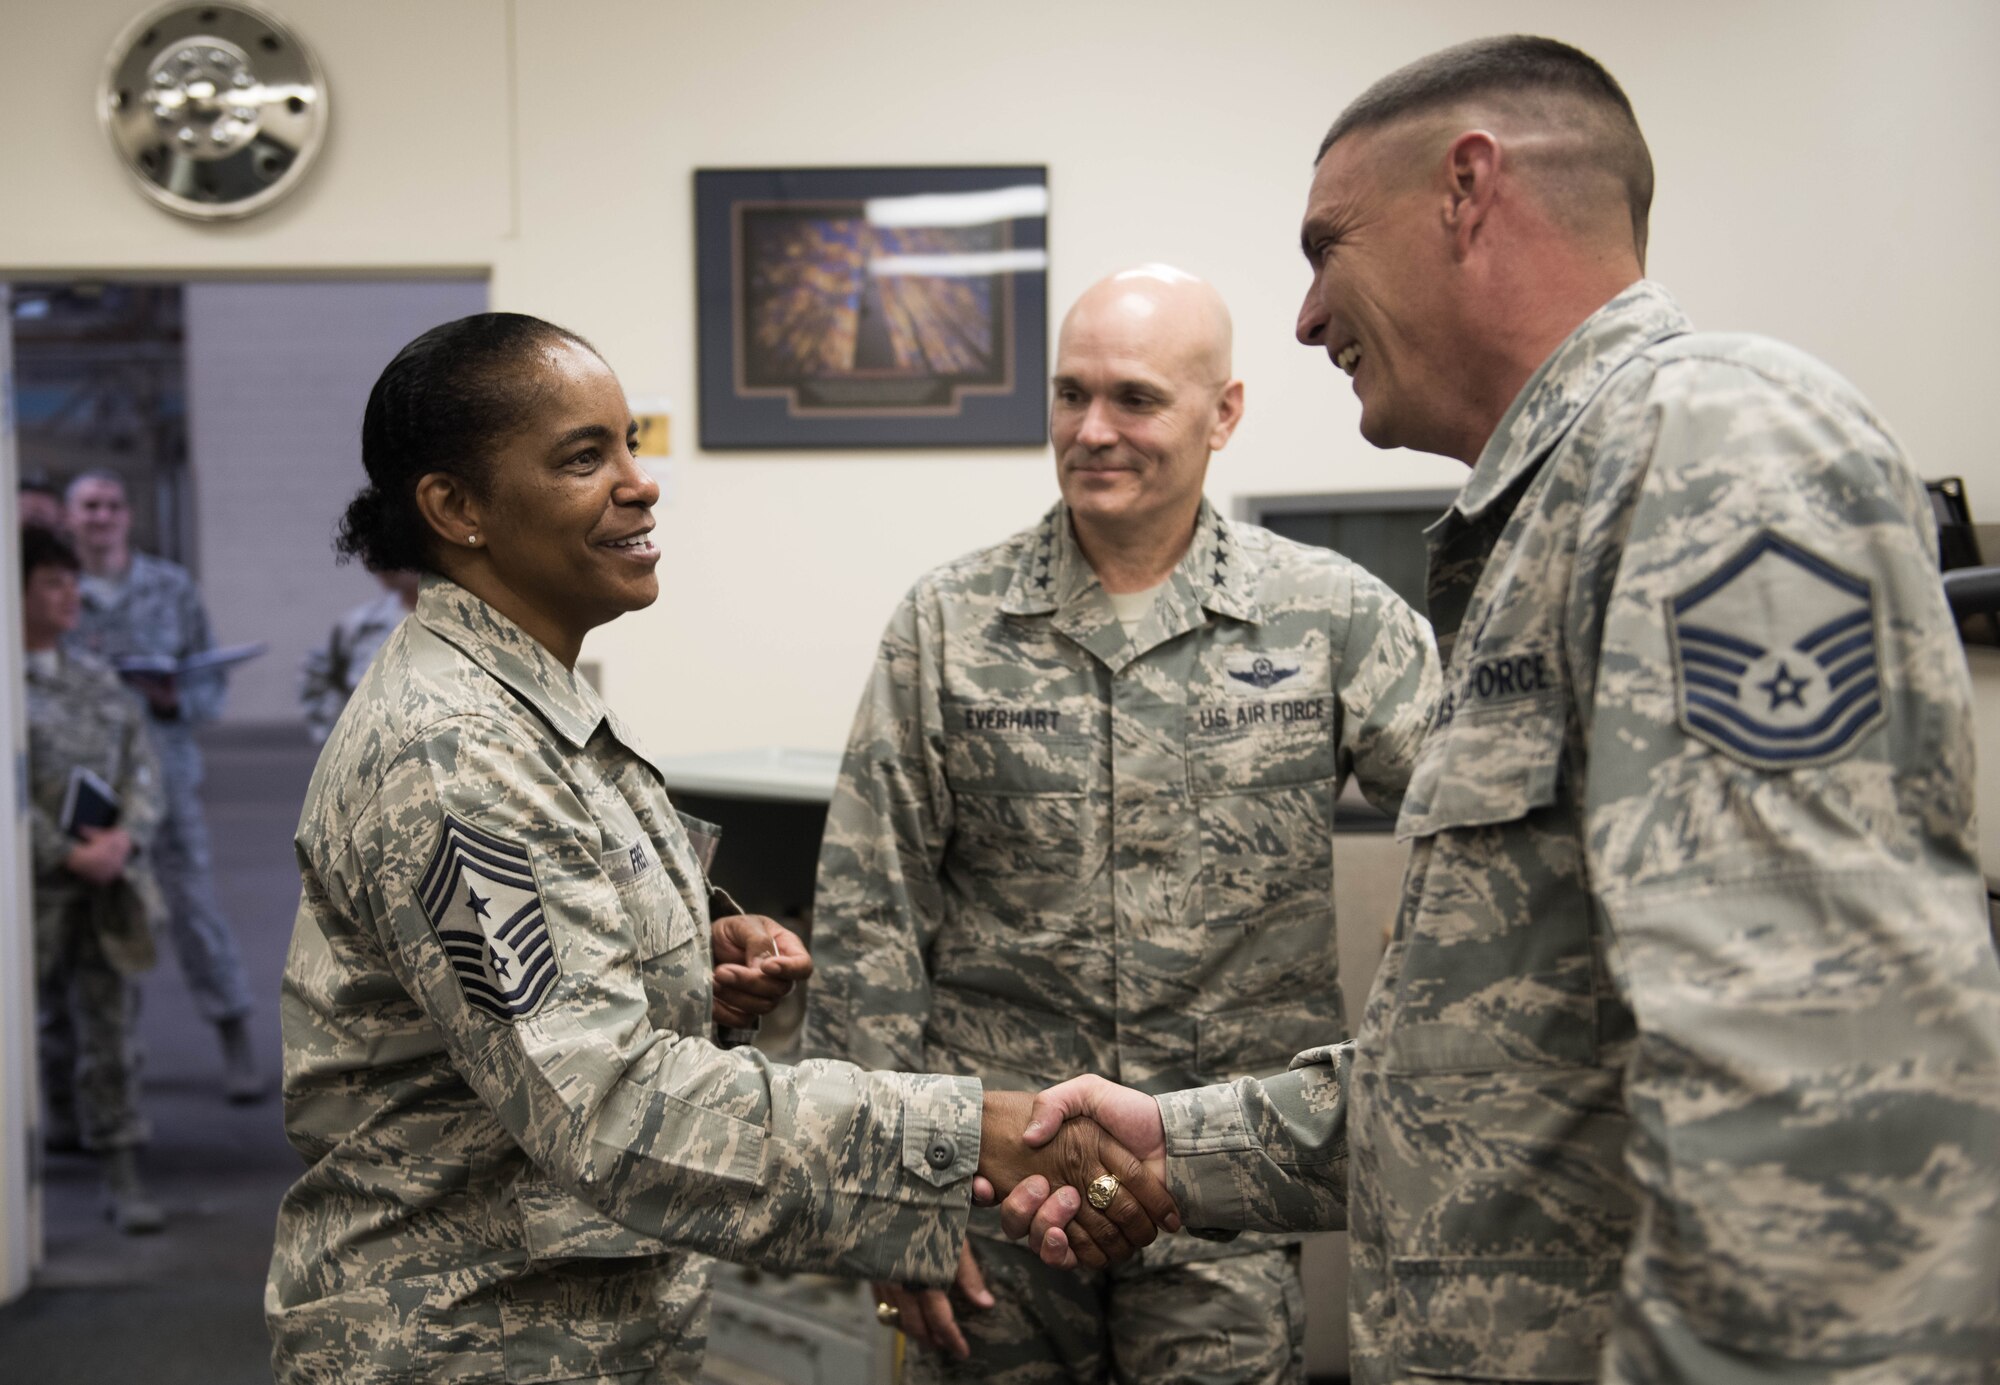 Gen. Carlton D. Everhart II, Air Mobility Command commander, and Chief Master Sgt. Shelina Frey, AMC command chief, recognize Master Sgt. Gavin Douglas, 92nd Maintenance Group quality assurance, for his service during their tour to the 92nd MXG June 20, 2017, at Fairchild Air Force Base, Washington. Everhart and Frey engaged Airmen across the base to get a first-hand look at how the units at Fairchild strive to provide first-class operations. (U.S. Air Force photo/Senior Airman Sean Campbell)